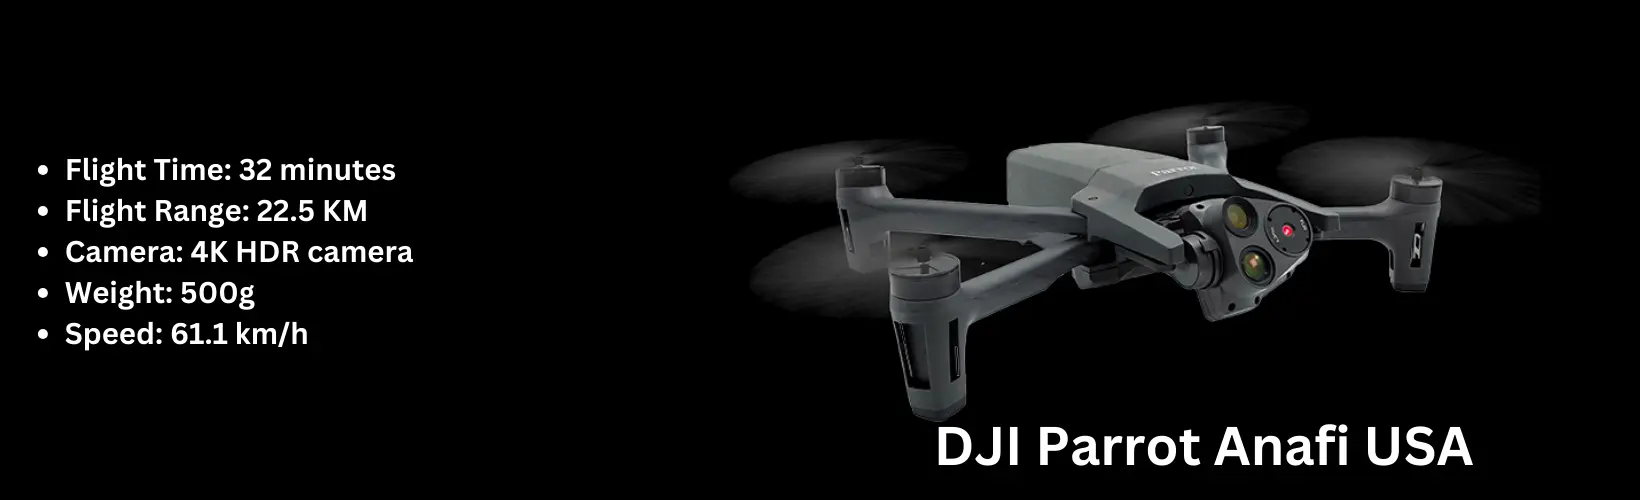 DJI-Parrot-Anafi-USA-specifications